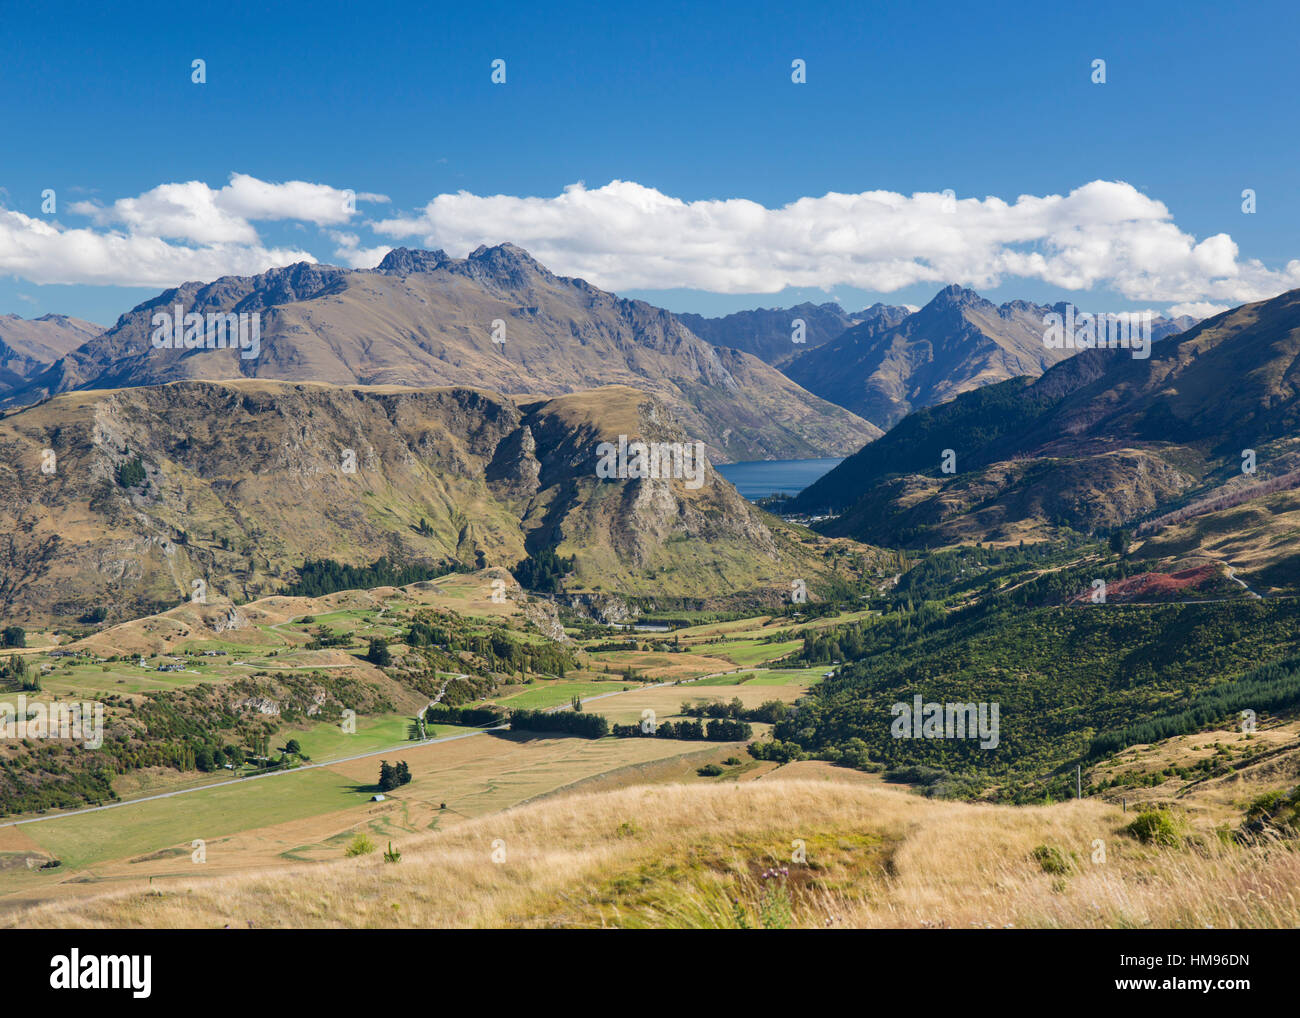 View towards Lake Wakatipu from the Coronet Peak road, Queenstown, Queenstown-Lakes district, Otago, South Island, New Zealand Stock Photo